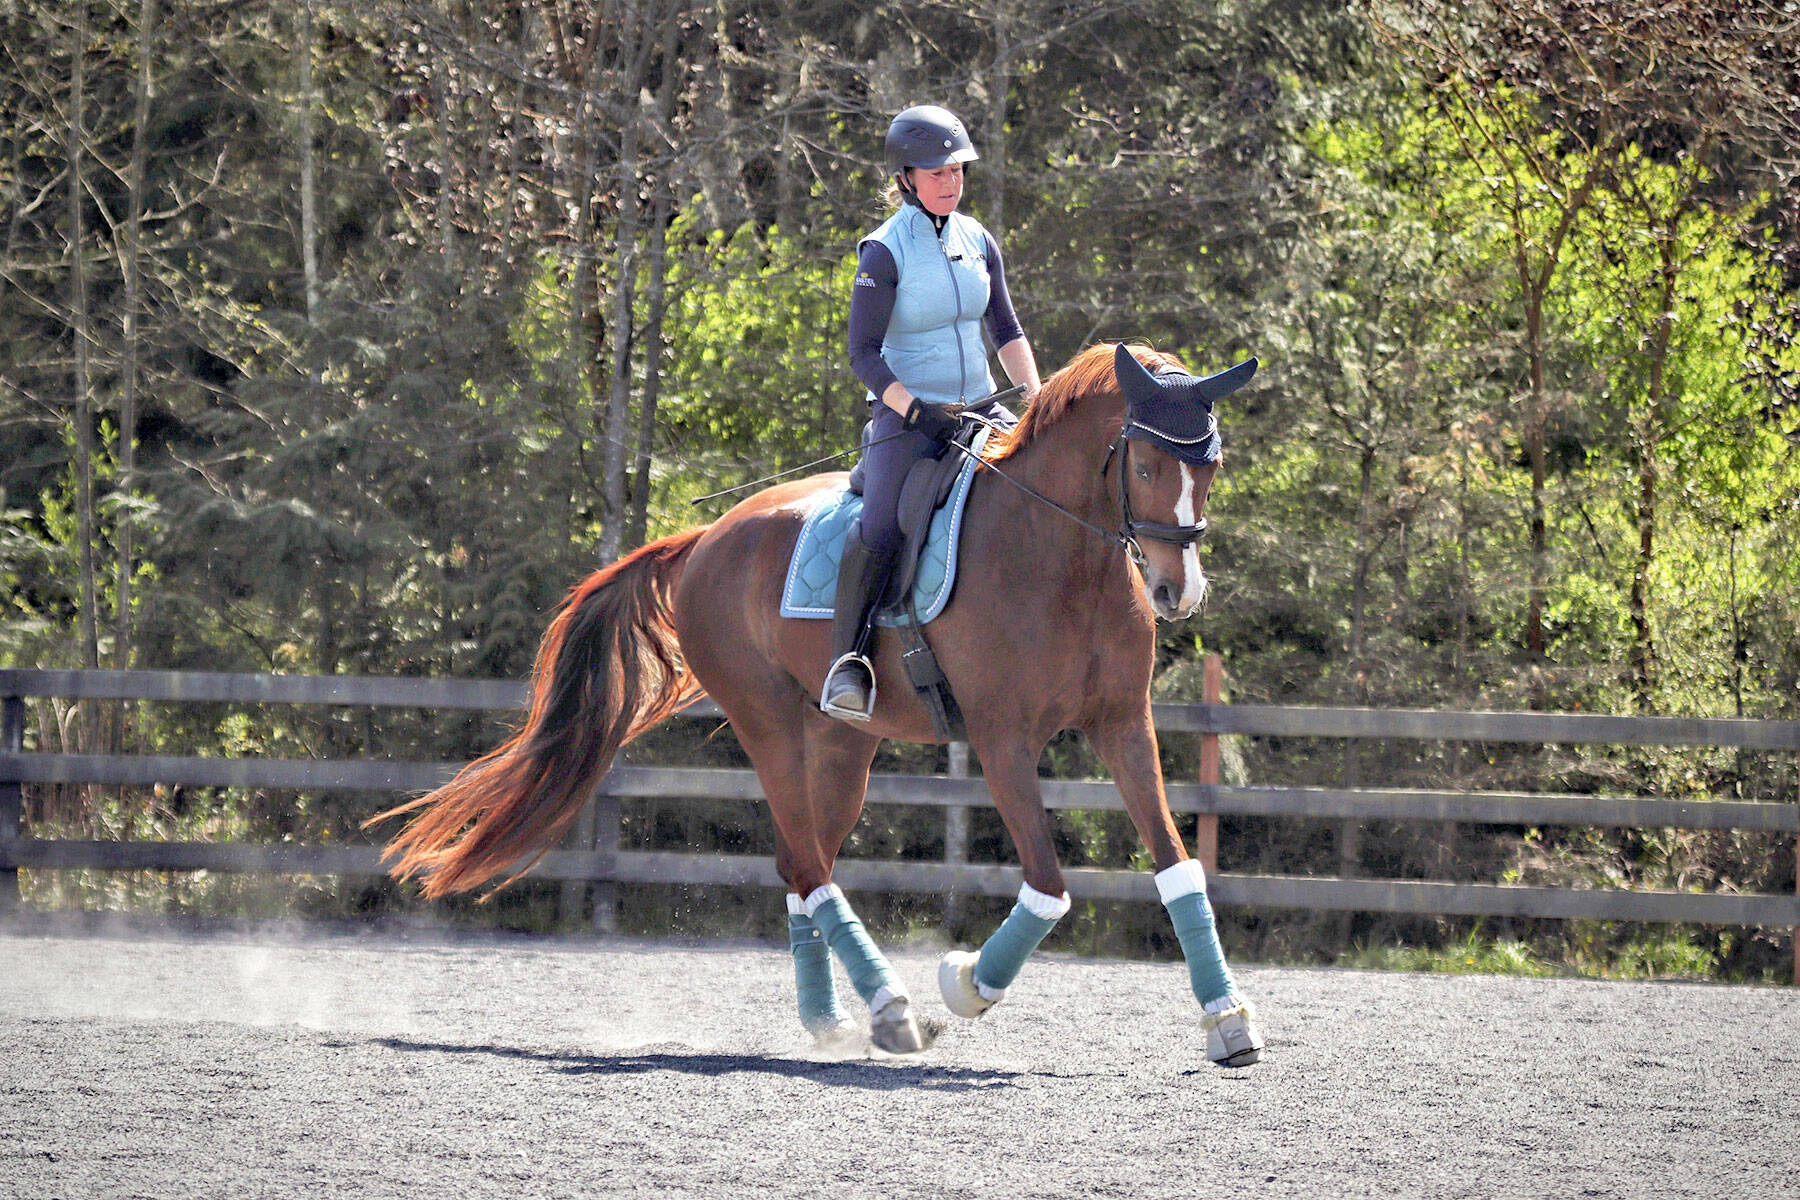 Congratulations to Heron Pond Farm owner/trainer Christine Headley, riding Gordy, for receiving The Dressage Foundation’s $1,000 grant from its Trip Harting Fund for Pony Club Members and Graduates. (Courtesy of Hannah Grace)